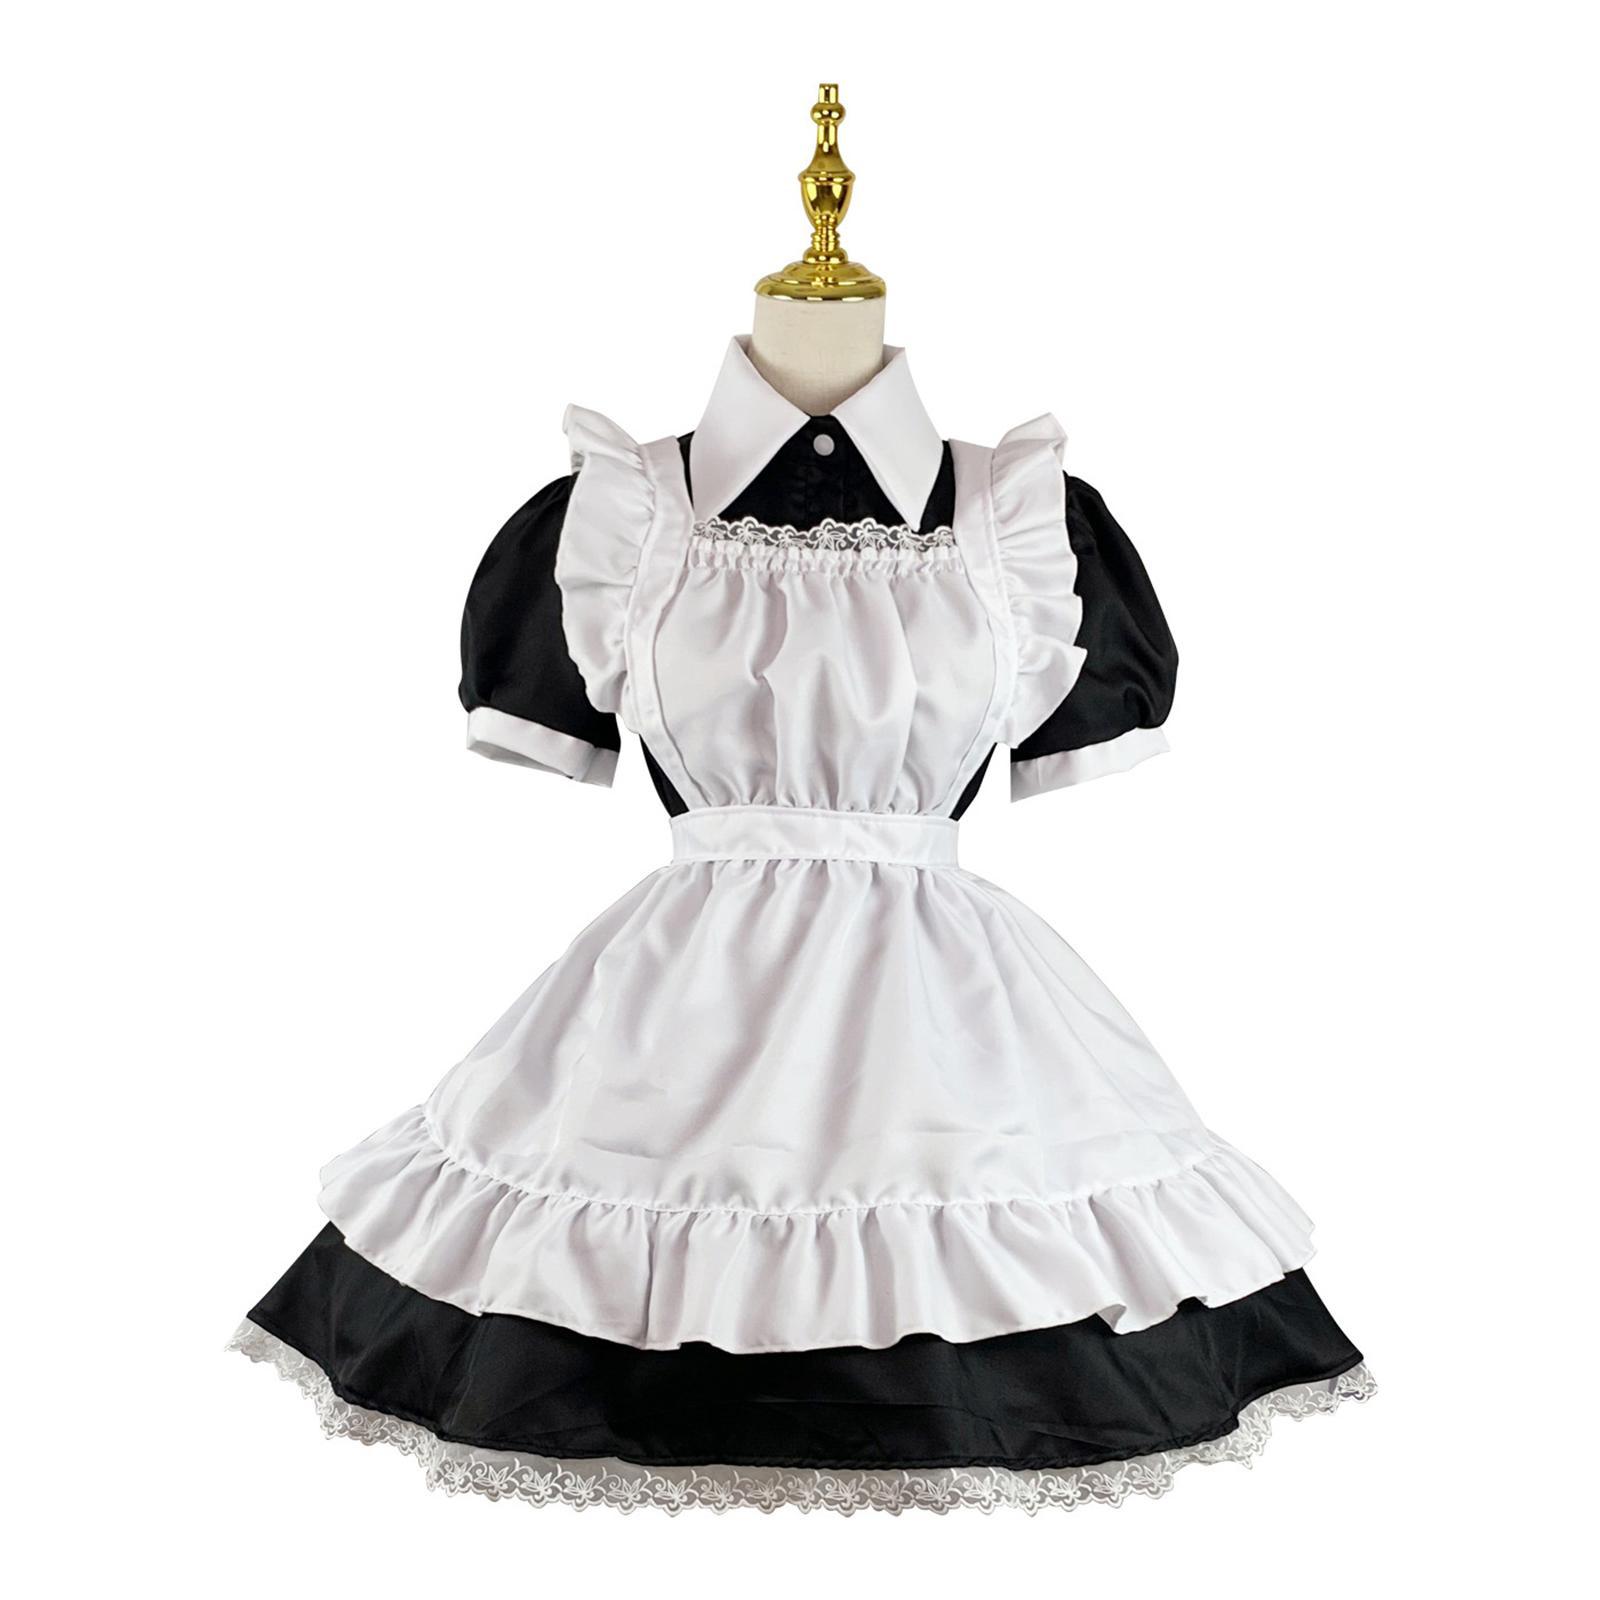 Classic Maid Costume for Halloween Fancy Dress Japanese Anime Outfit Party